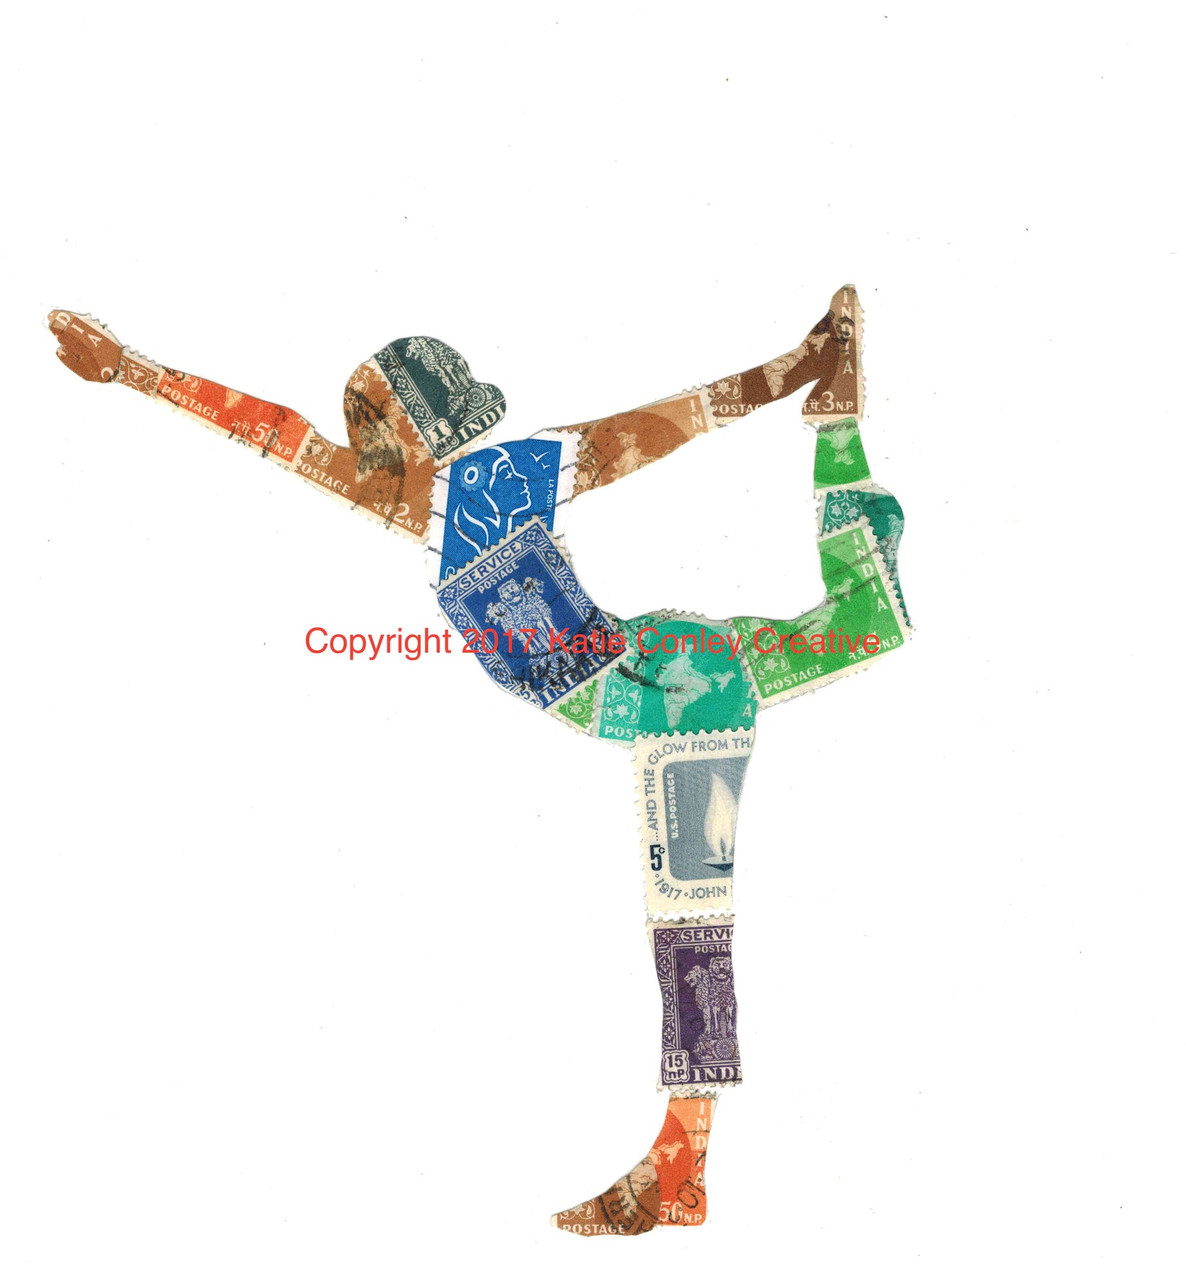 se tv smerte Generel Yoga Pose 2 - Postage Stamp Collage Print by Katie Conley - ART FOR THE  PEOPLE GALLERY